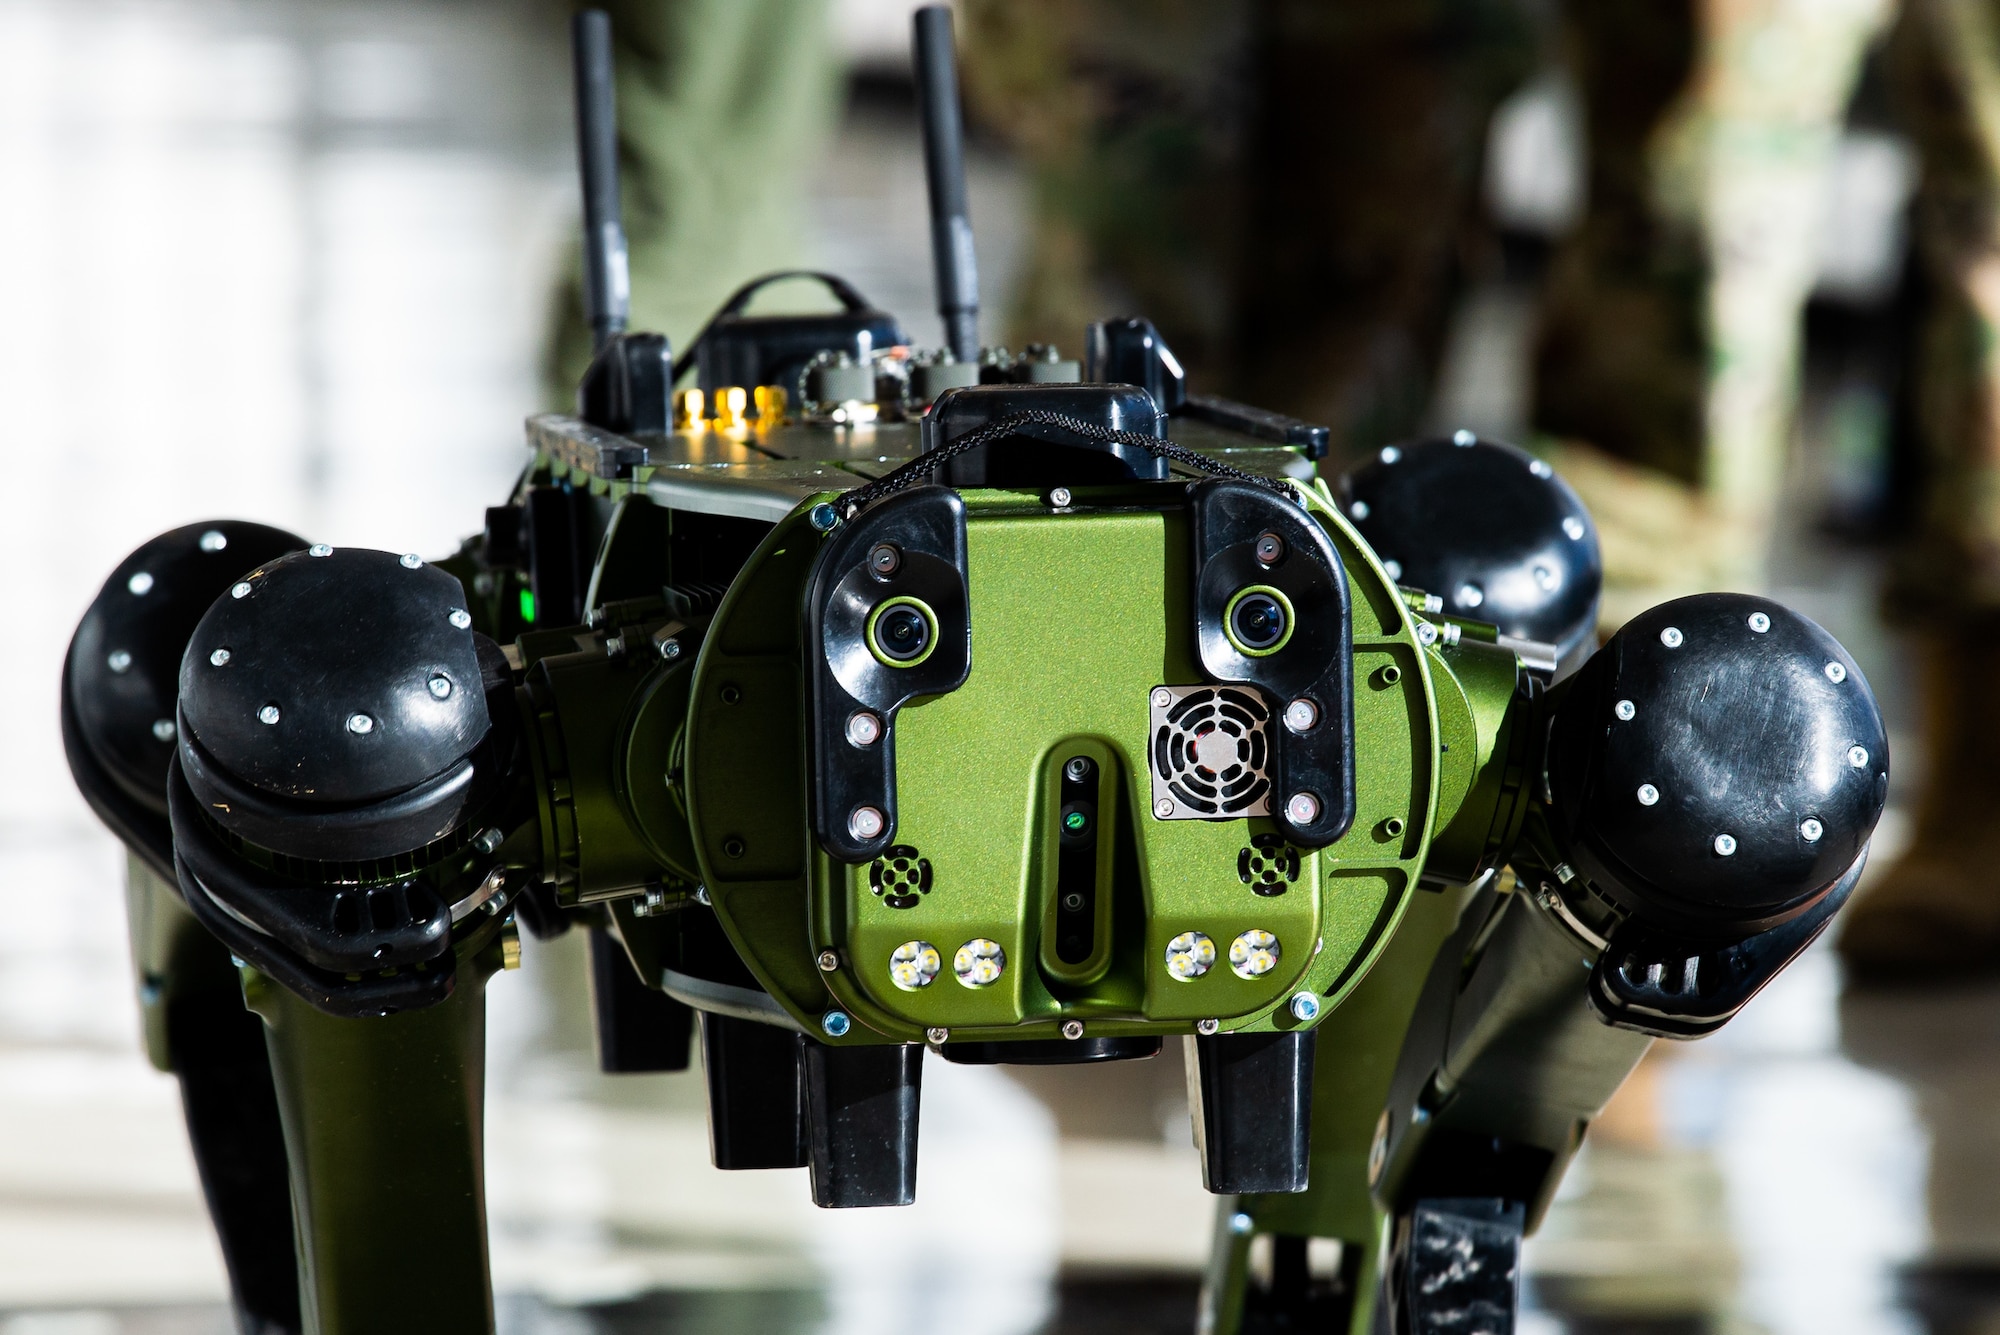 A close up photo of the front of a Ghost Robotics Vision 60 robot in Fairchild Hall, U.S. Air Force Academy, Colorado, February 8th 2023.